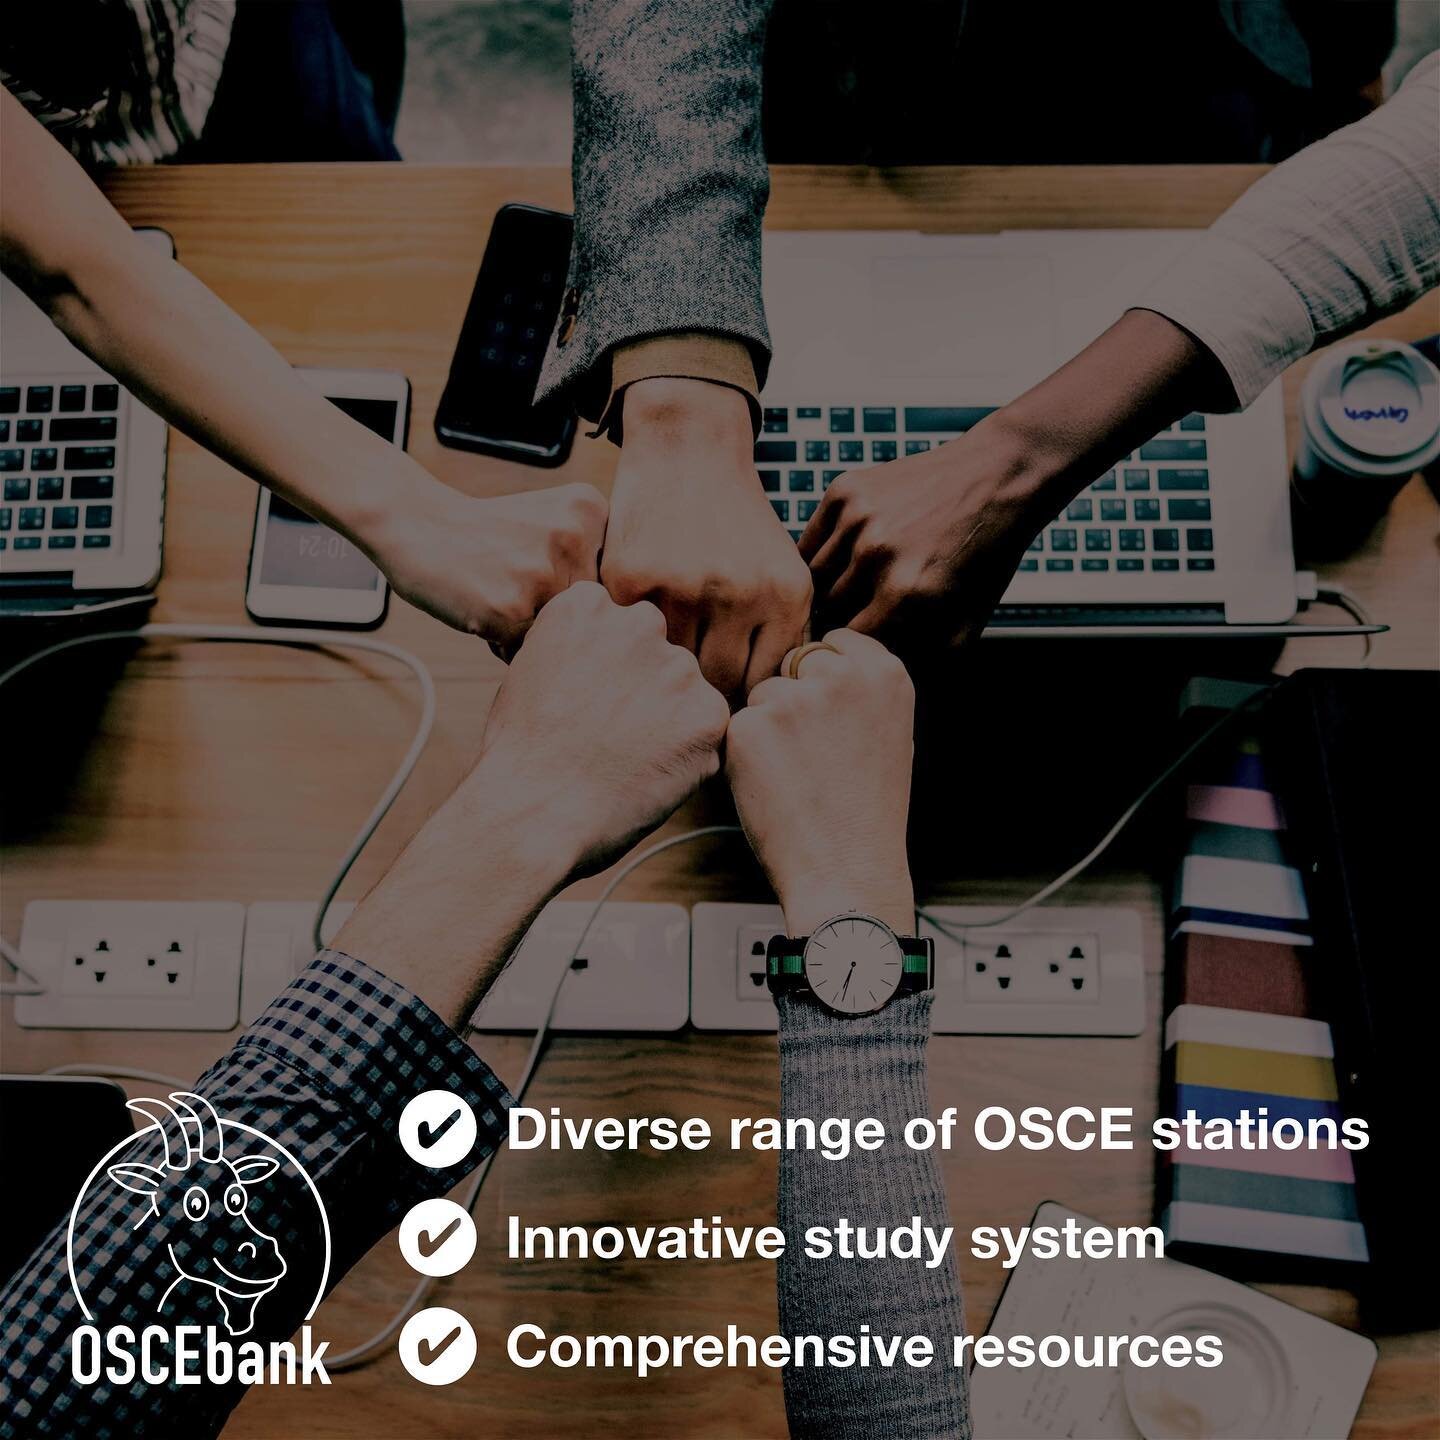 A message from our friends at OSCEbank!
💫  OSCEbank's exclusive 25% discount for University of Wollongong Students is back! Start studying today with OSCEbank - OSCE study, transformed! 💫 
➡ Save time! We have prepared everything for you: stems, pa